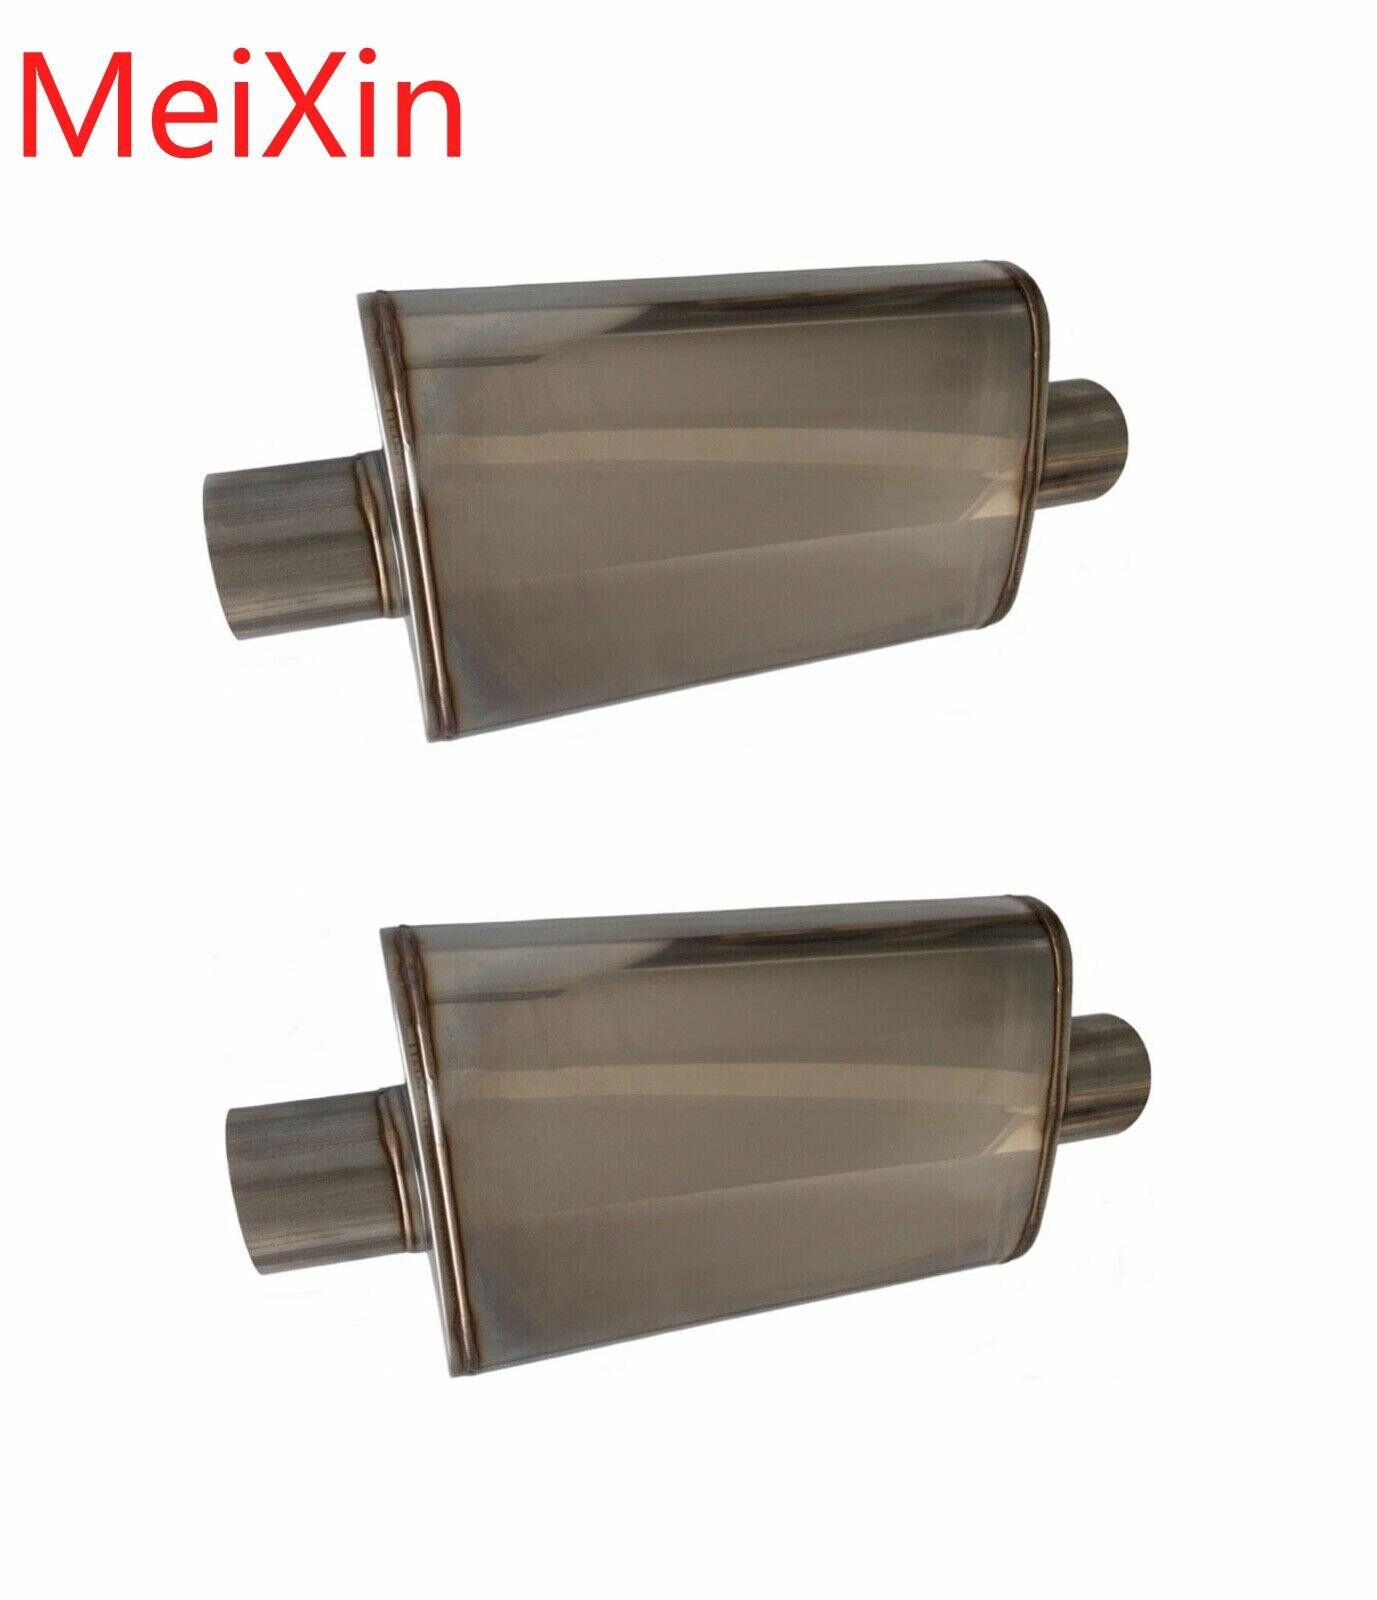 A pair of 3-inch inlet/outlet center universal mufflers through exhaust